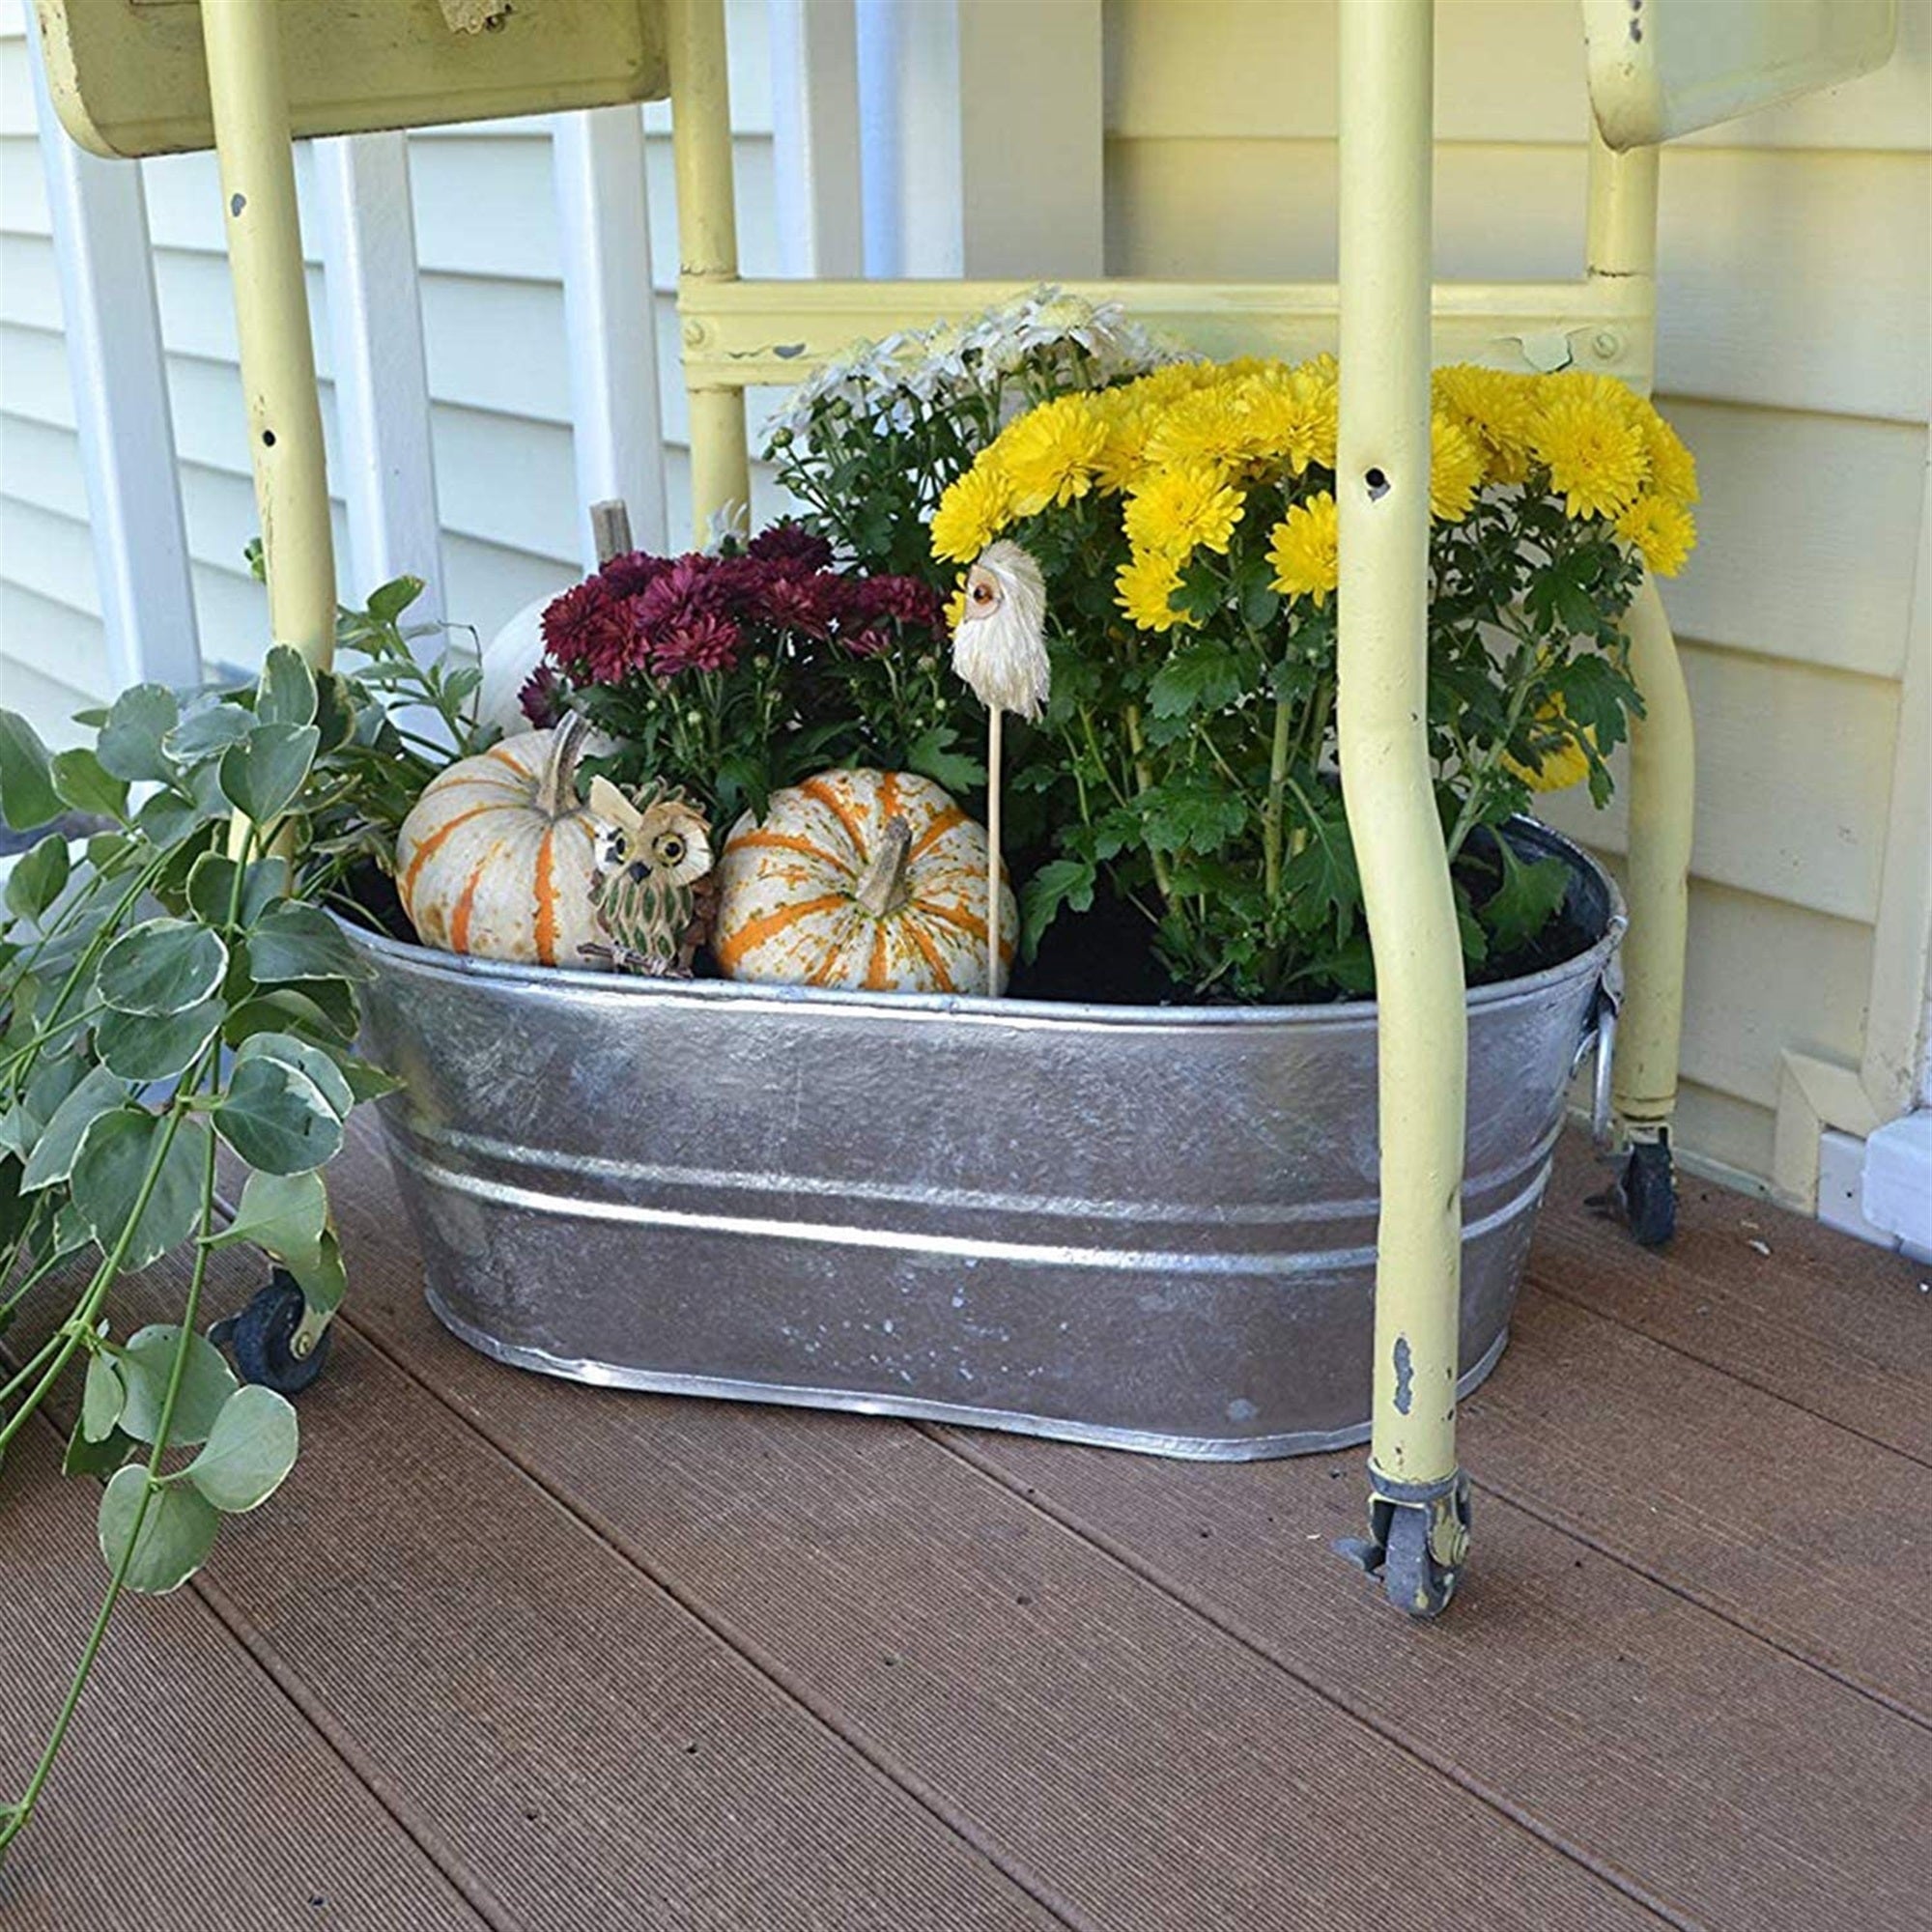 Behrens Hot Dipped Galvanized Steel Oval Planter/Tub, Silver, 5.5 Gallon Capacity